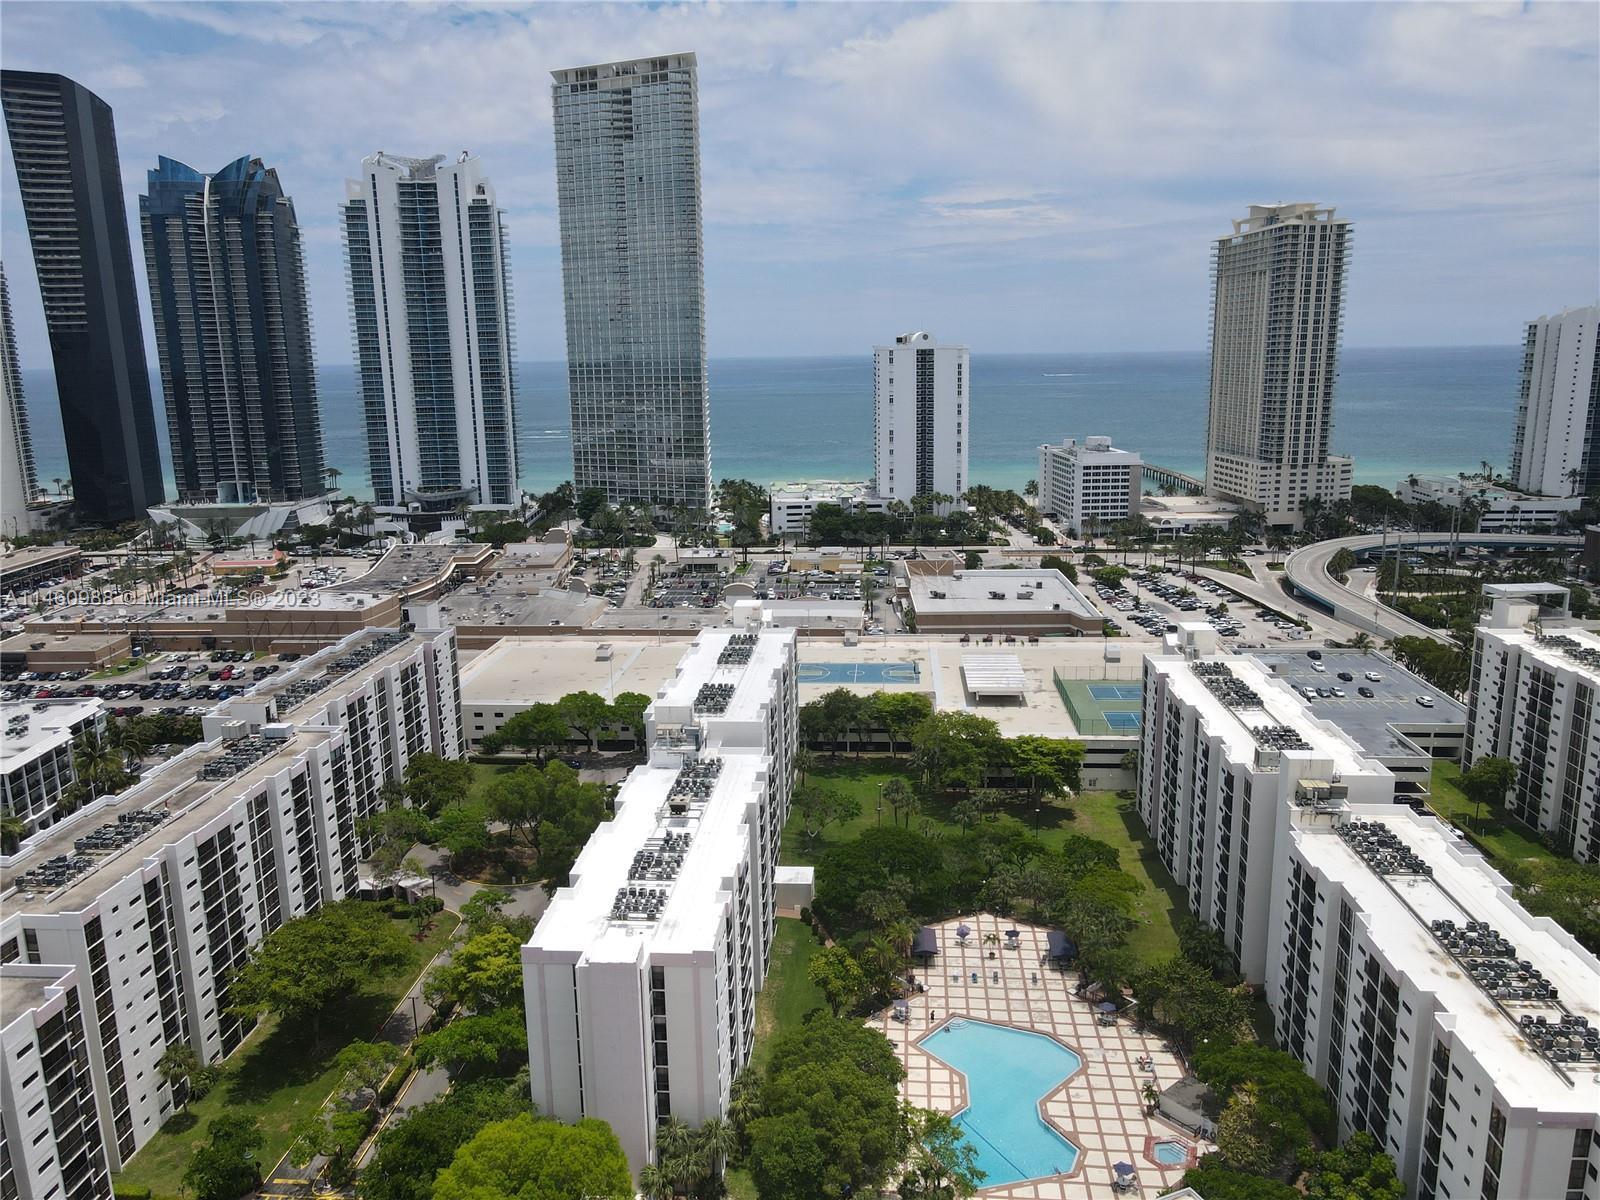 Located in the heart of Sunny Isles Beach, this 1-bedroom, 1.5-bathroom residence offers convenience